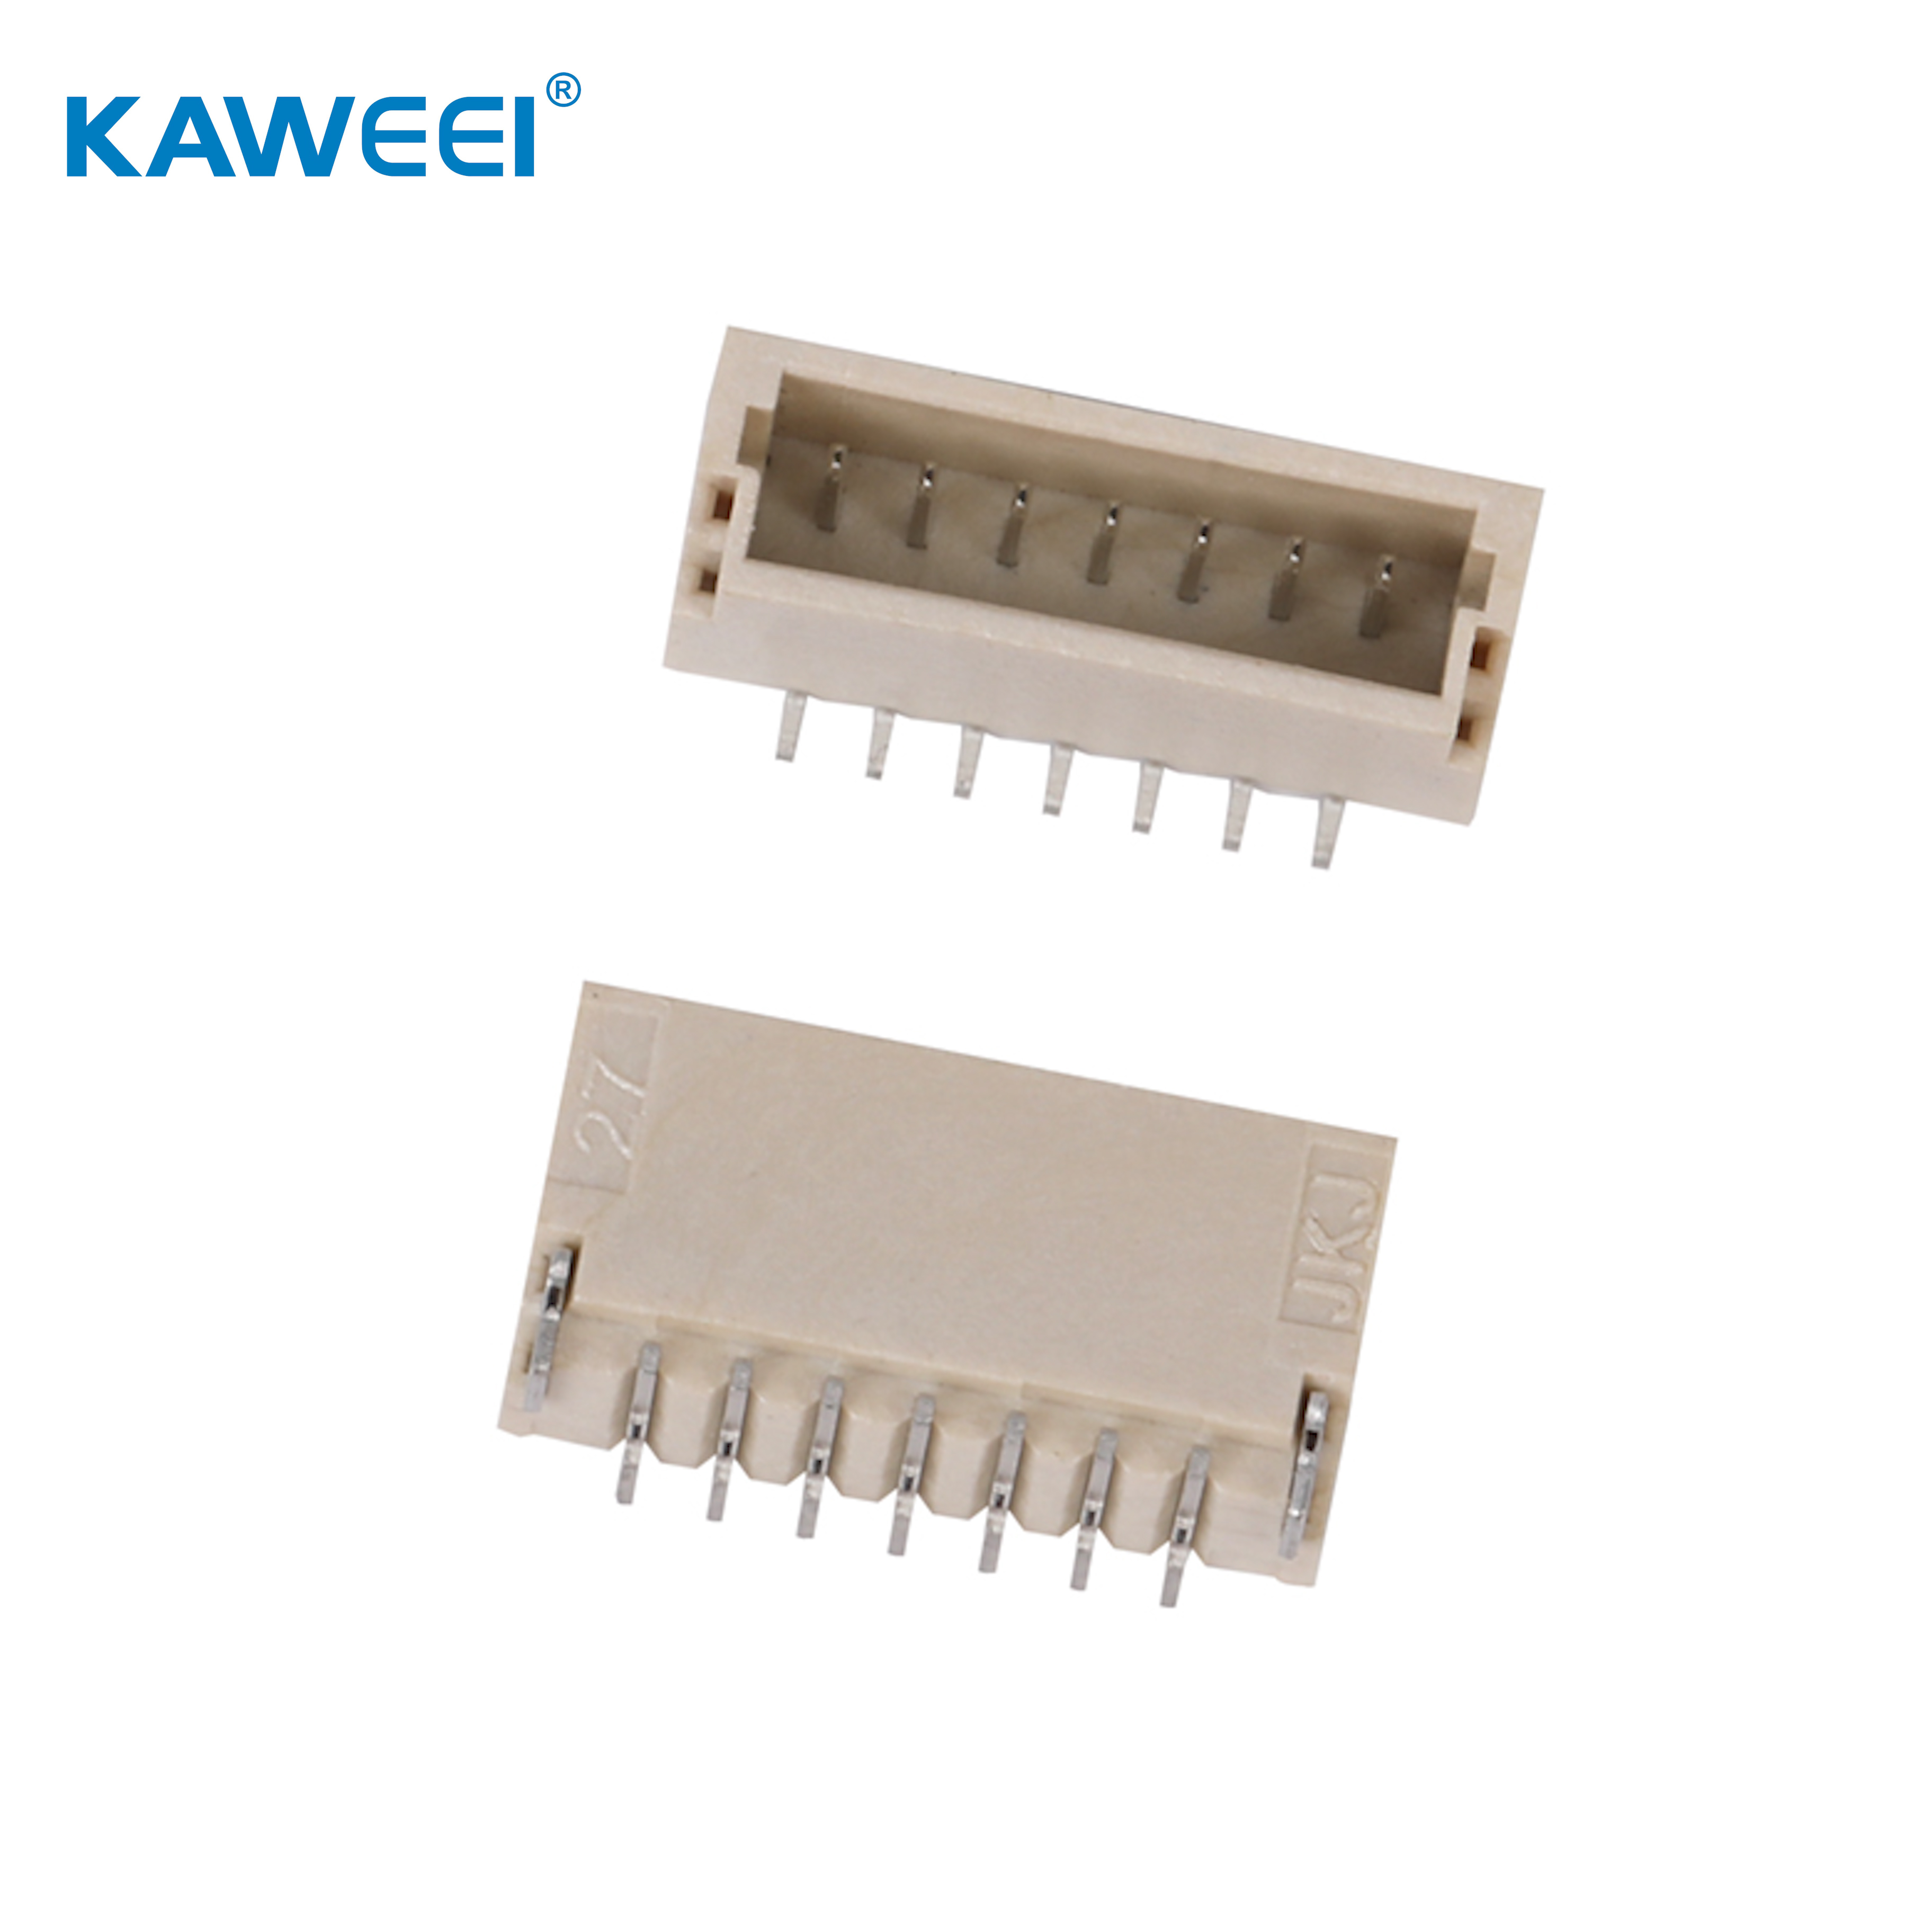  1.0mm pitch wire to board connector